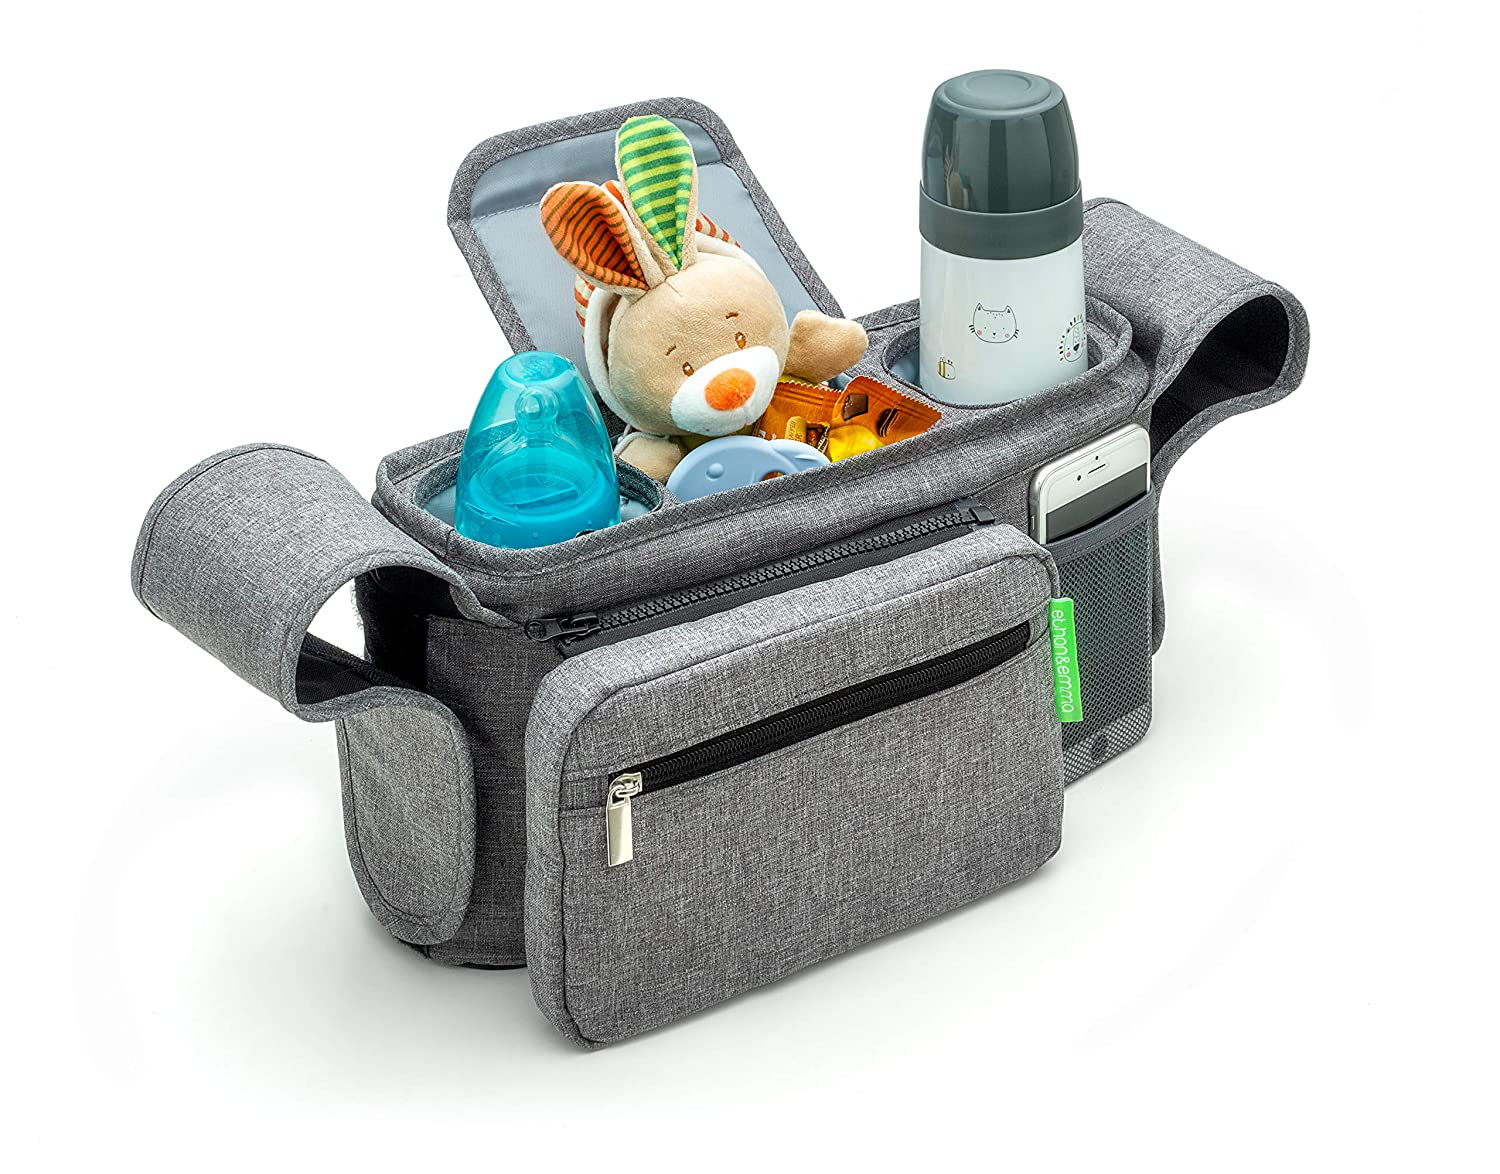 Ethan & Emma Universal Baby Stroller Organizer with Insulated Cup Holders for Smart Moms. Diaper Storage, Secure Straps, Detachable Bag, Pockets for Phone, Keys, Toys. Compact Design Fit All Strollers Animals & Pet Supplies > Pet Supplies > Dog Supplies > Dog Treadmills Ethan & Emma Grey  